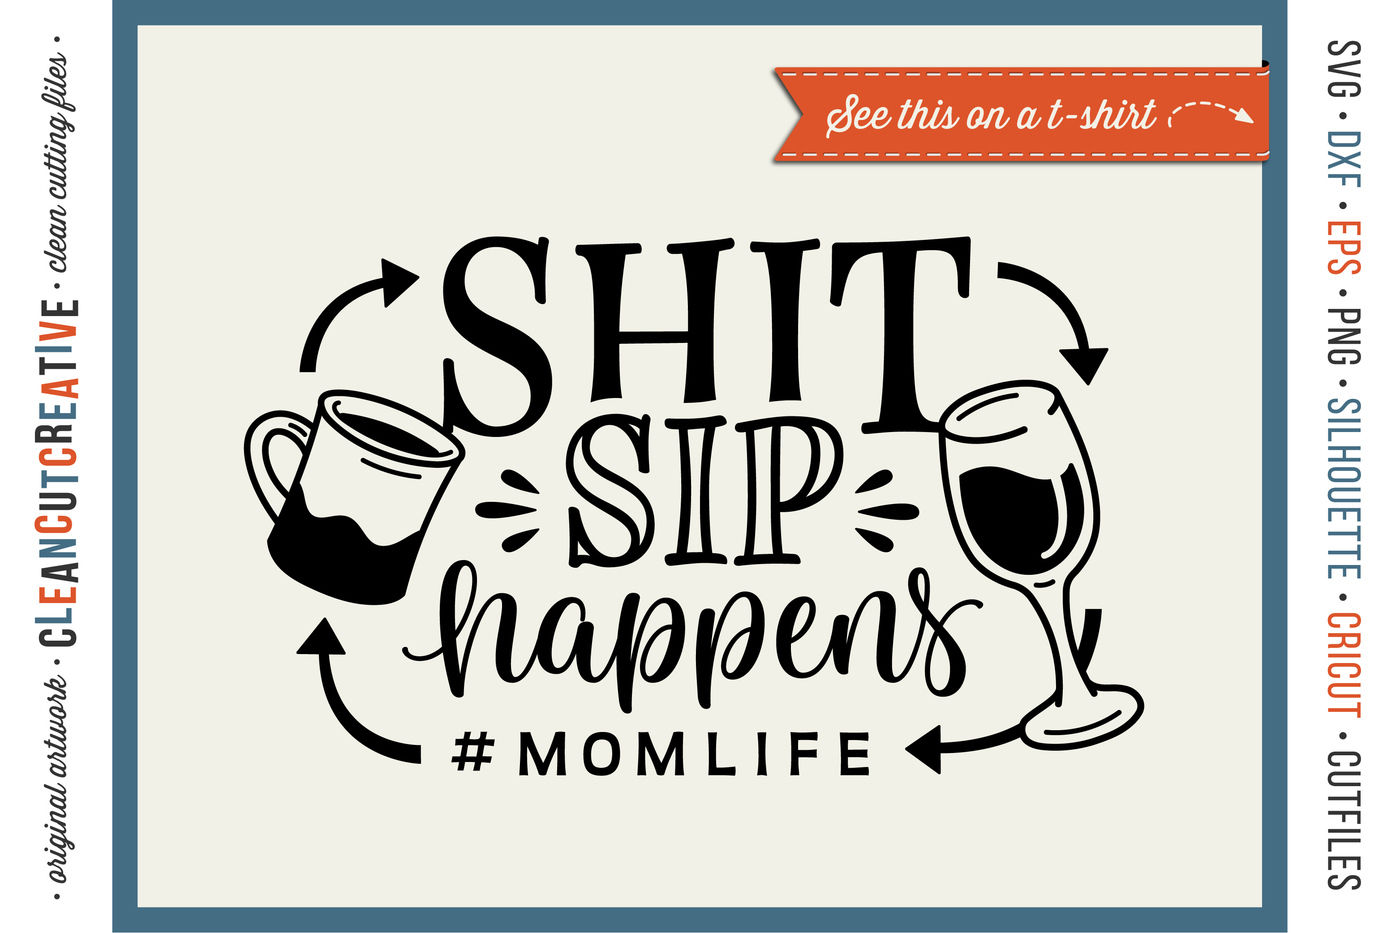 SH*T/SIP HAPPENS! #MOMLIFE - funny coffee and wine quote ...